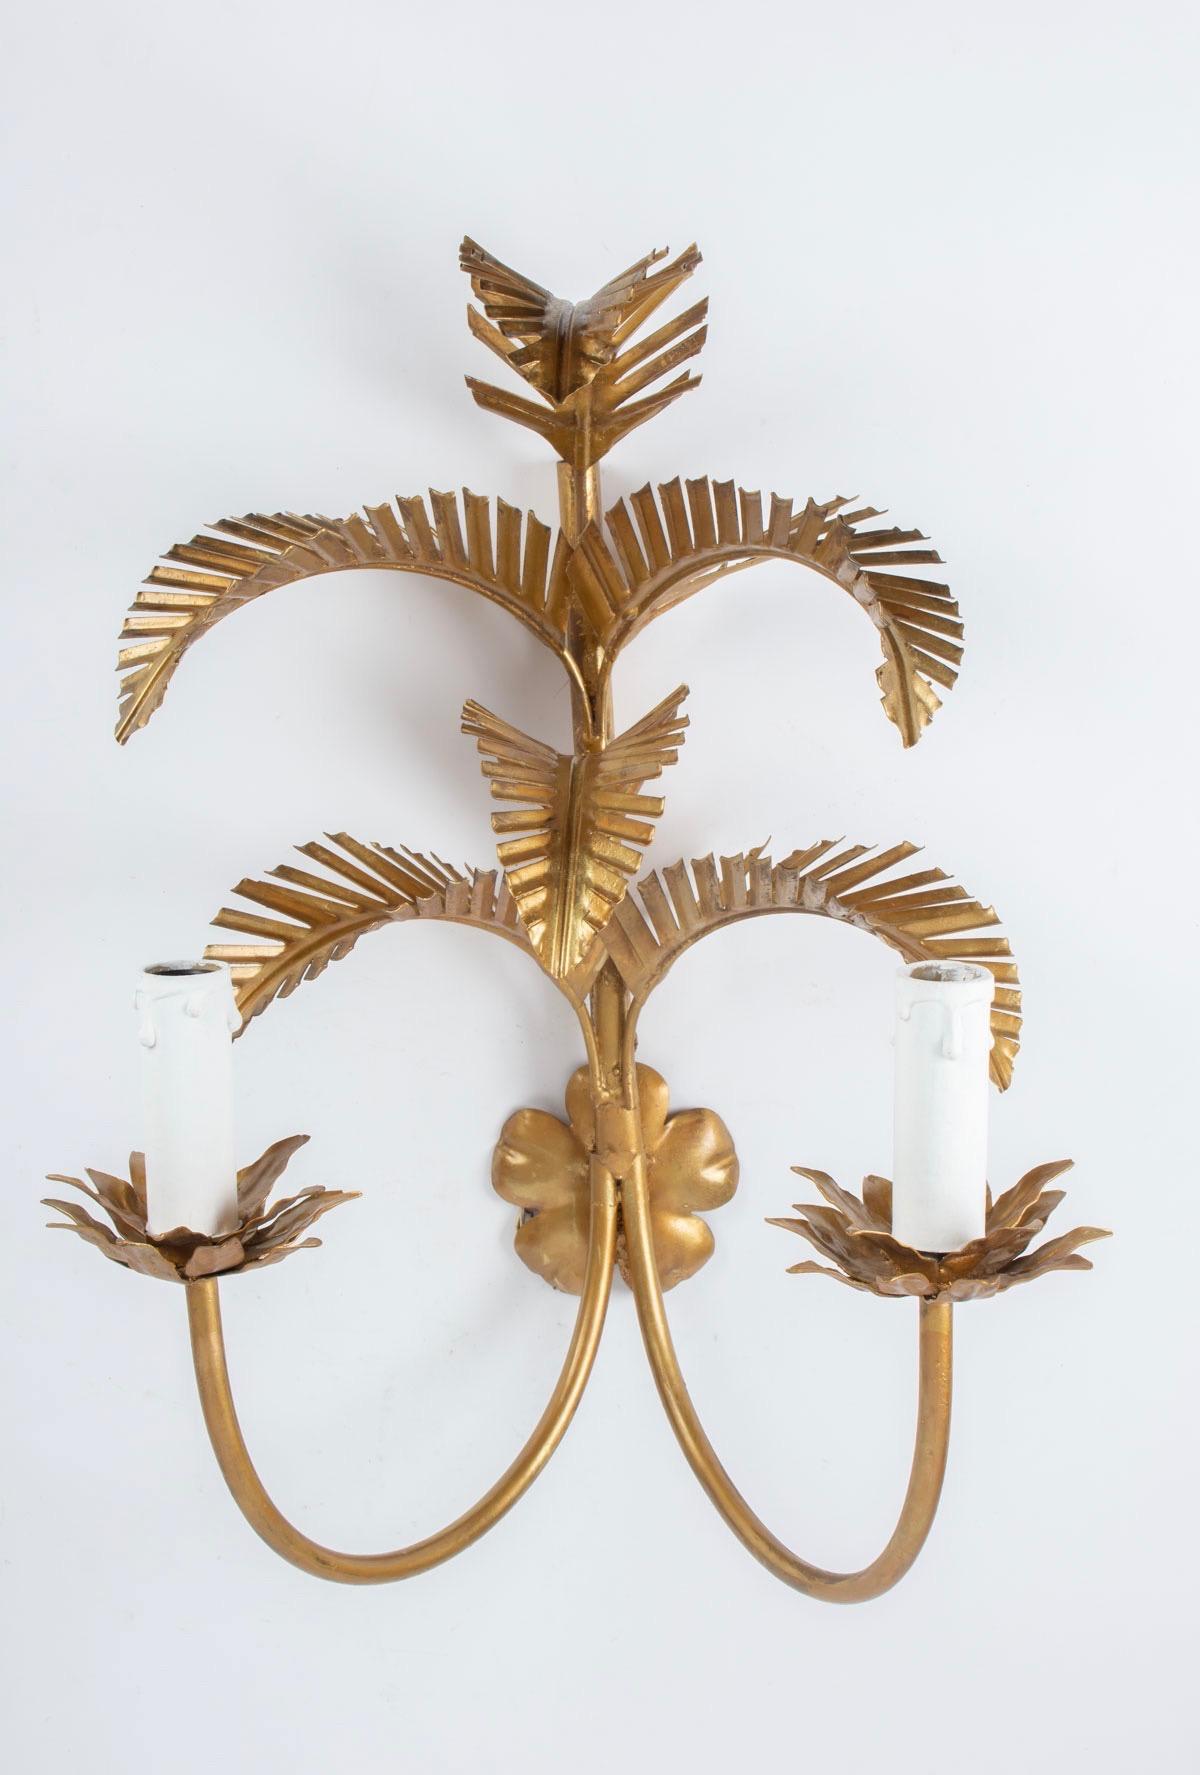 Each sconce presents six palm leaves placed in front and in profile giving it depth.
On the lower part a wall support in the shape of a petal on which rest two luminous arms placed on either side of the sconce.
They are decorated at the base of the